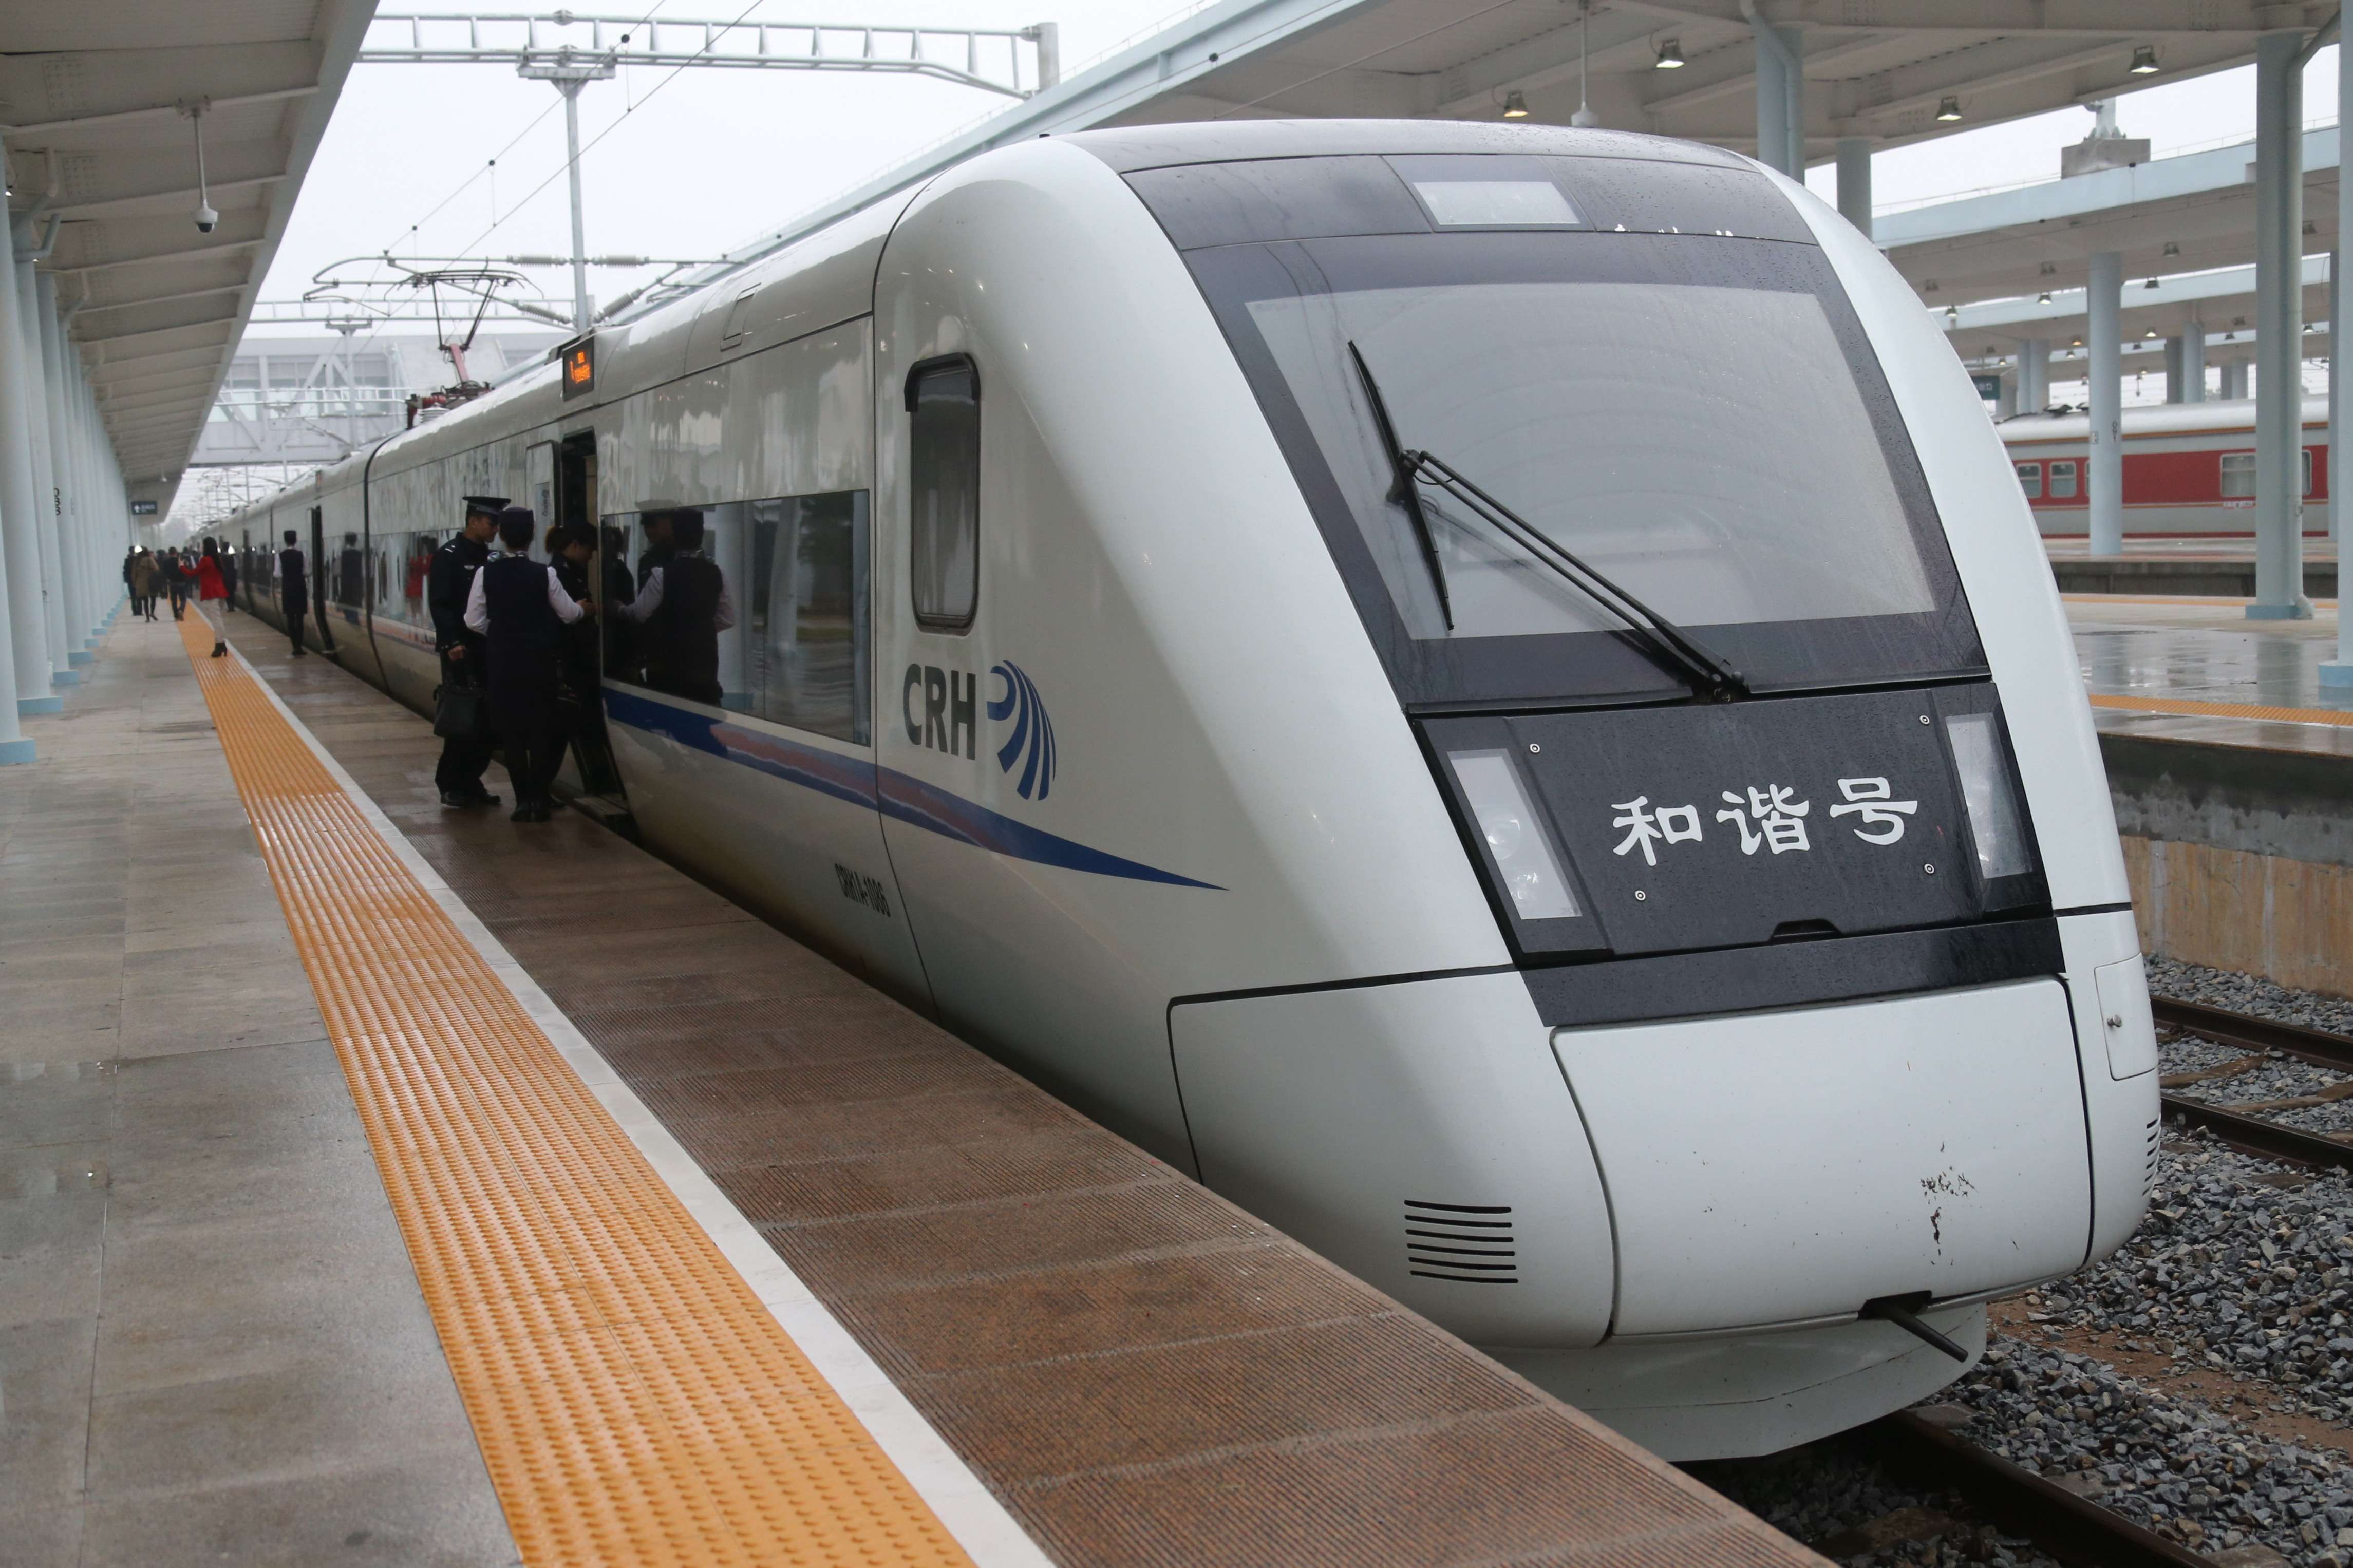 A bullet train at Haikou station in Hainan province.The railway is among formerly “untouchable”, strategic and SOE-dominated sectors being opened up for mixed ownership as part of a pilot reform programme in China. Photo: Xinhua